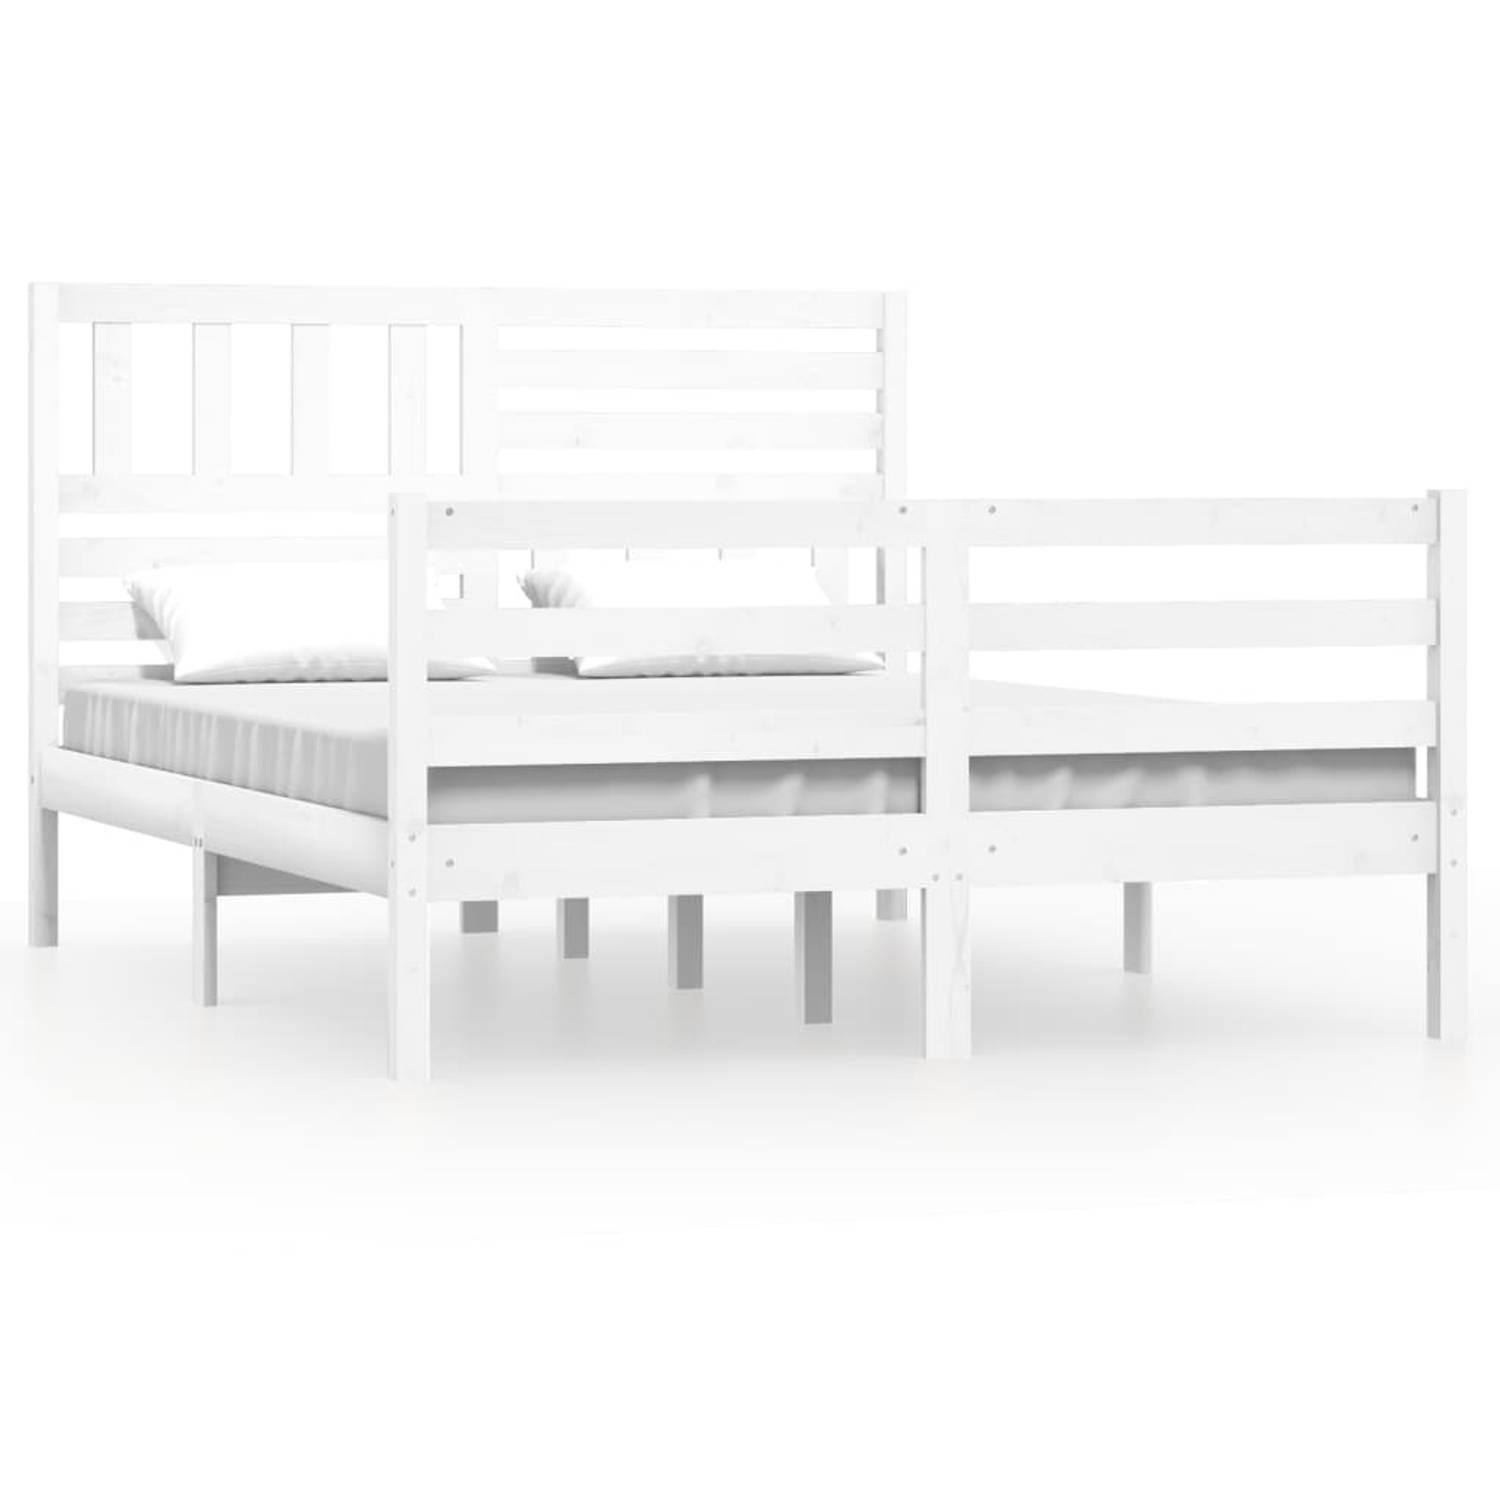 The Living Store Bedframe massief hout wit 140x190 cm - Bedframe - Bedframes - Tweepersoonsbed - Bed - Bedombouw - Dubbel Bed - Frame - Bed Frame - Ledikant - Bedframe Met Hoofdein